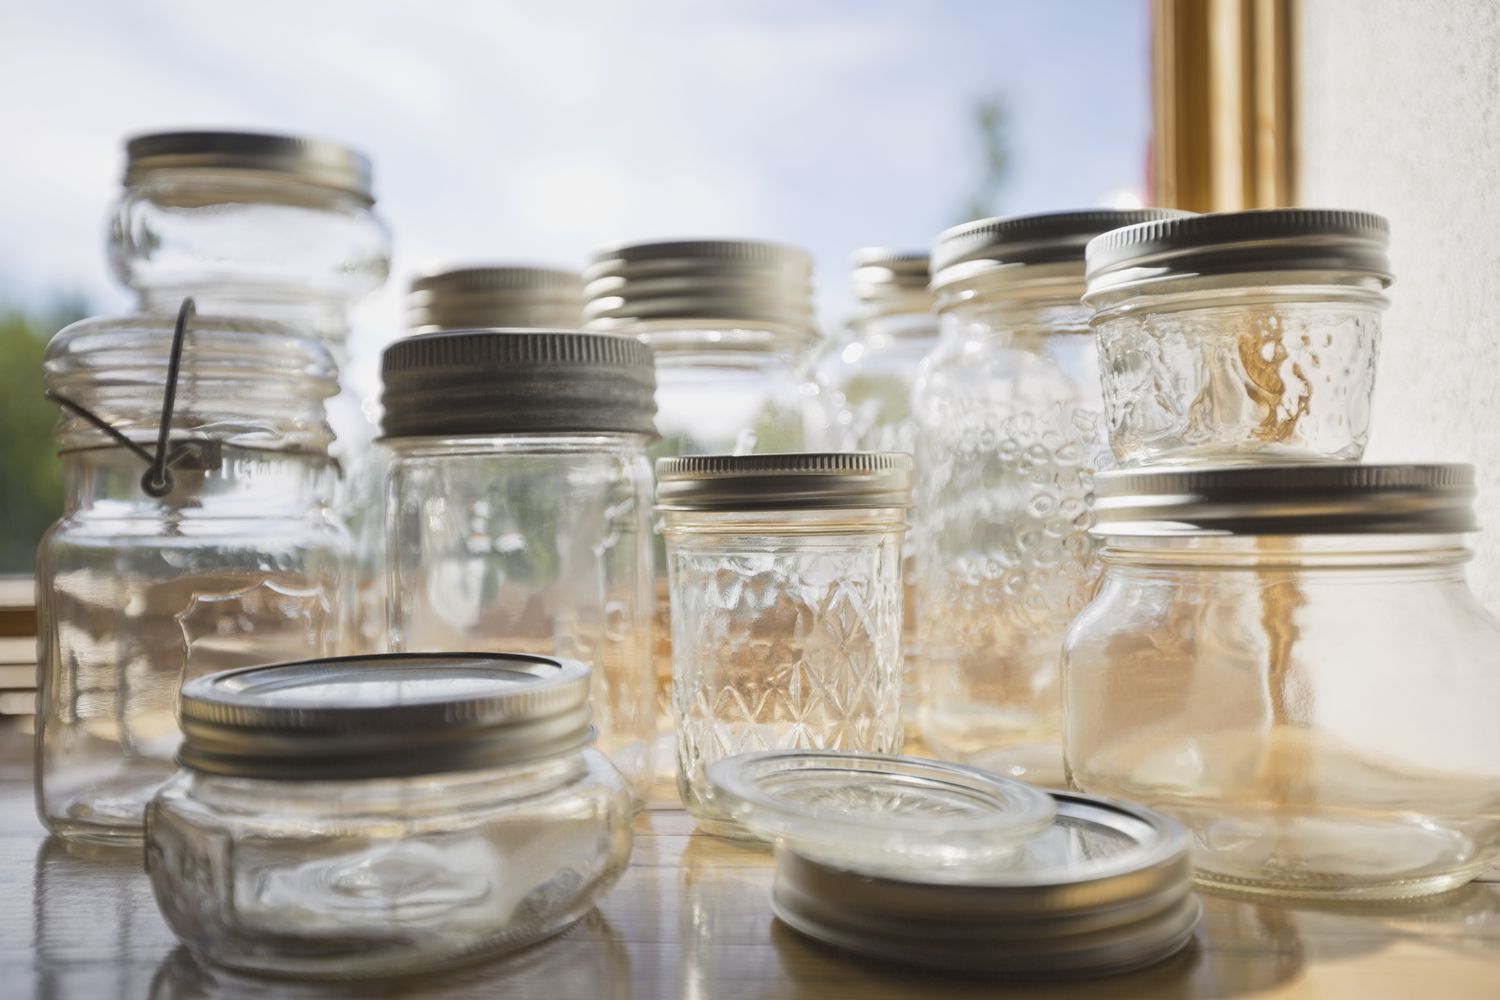 empty-canning-jars-gettyimages-608158393-589a9fad5f9b5874ee277242.jpg